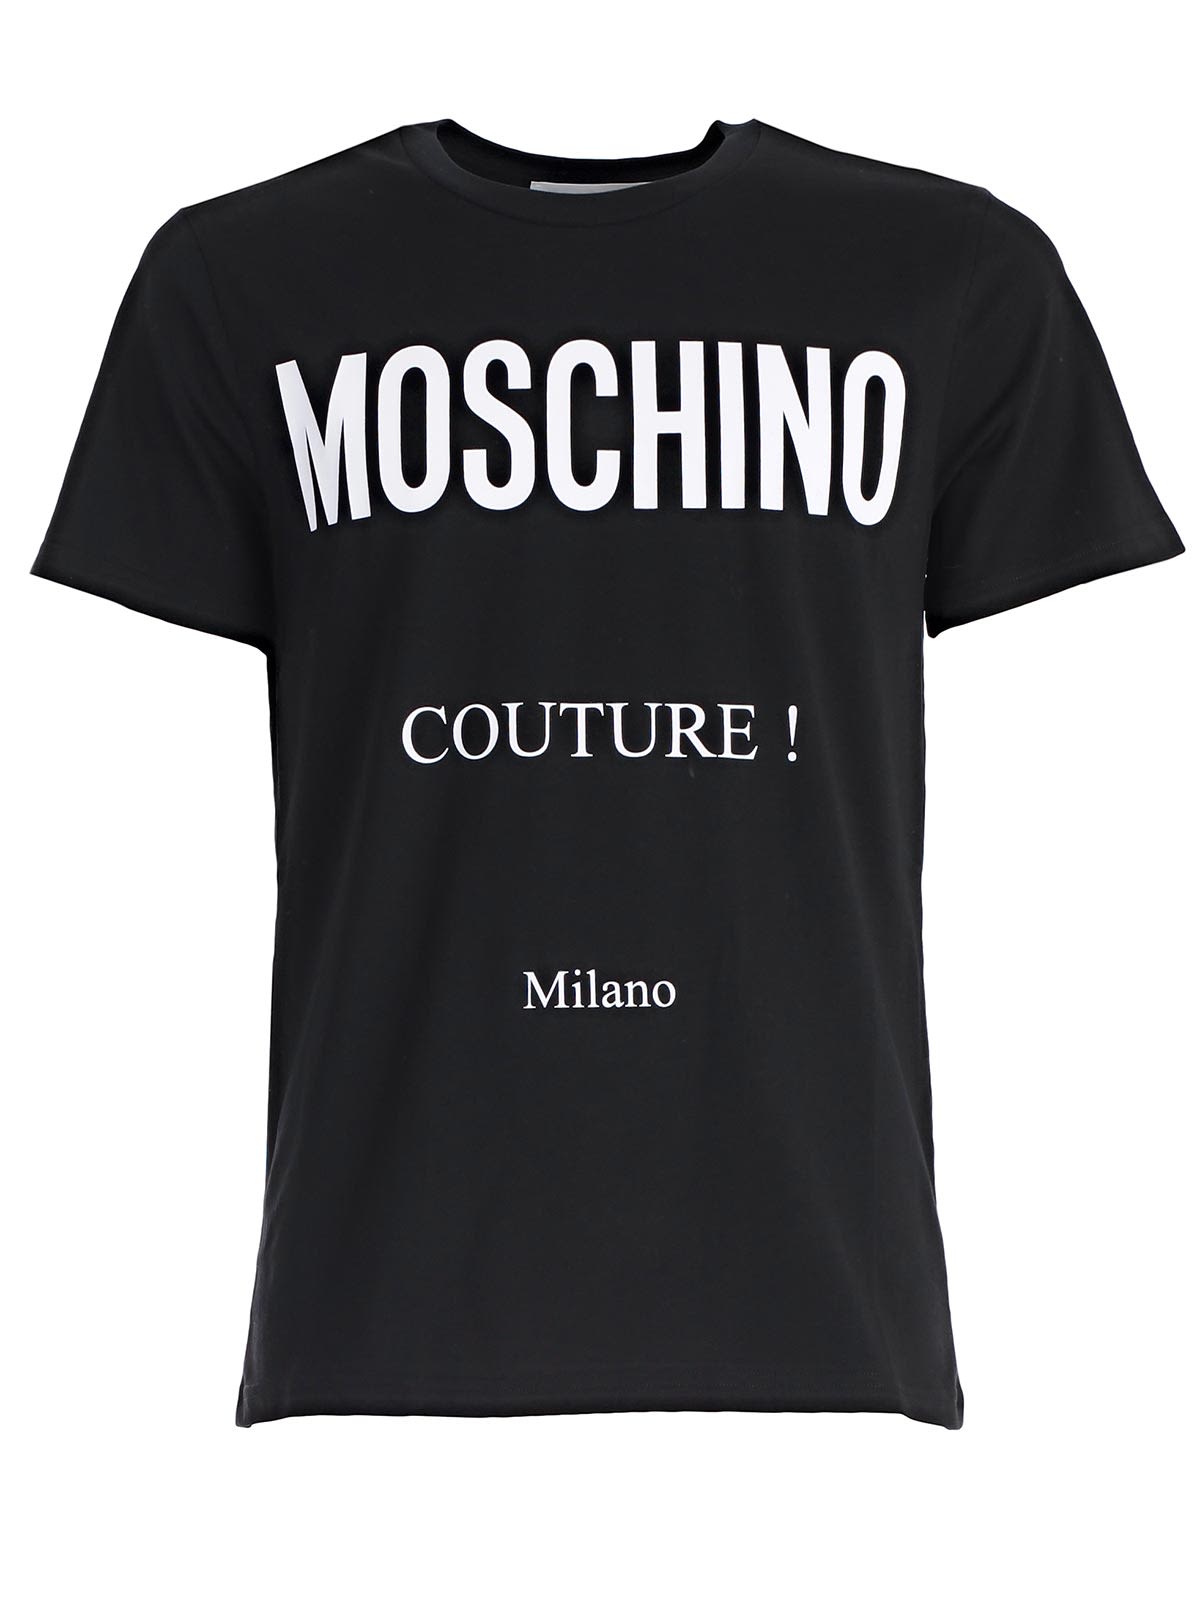 Moschino Couture! T-shirt - Black - 10651719 | italist